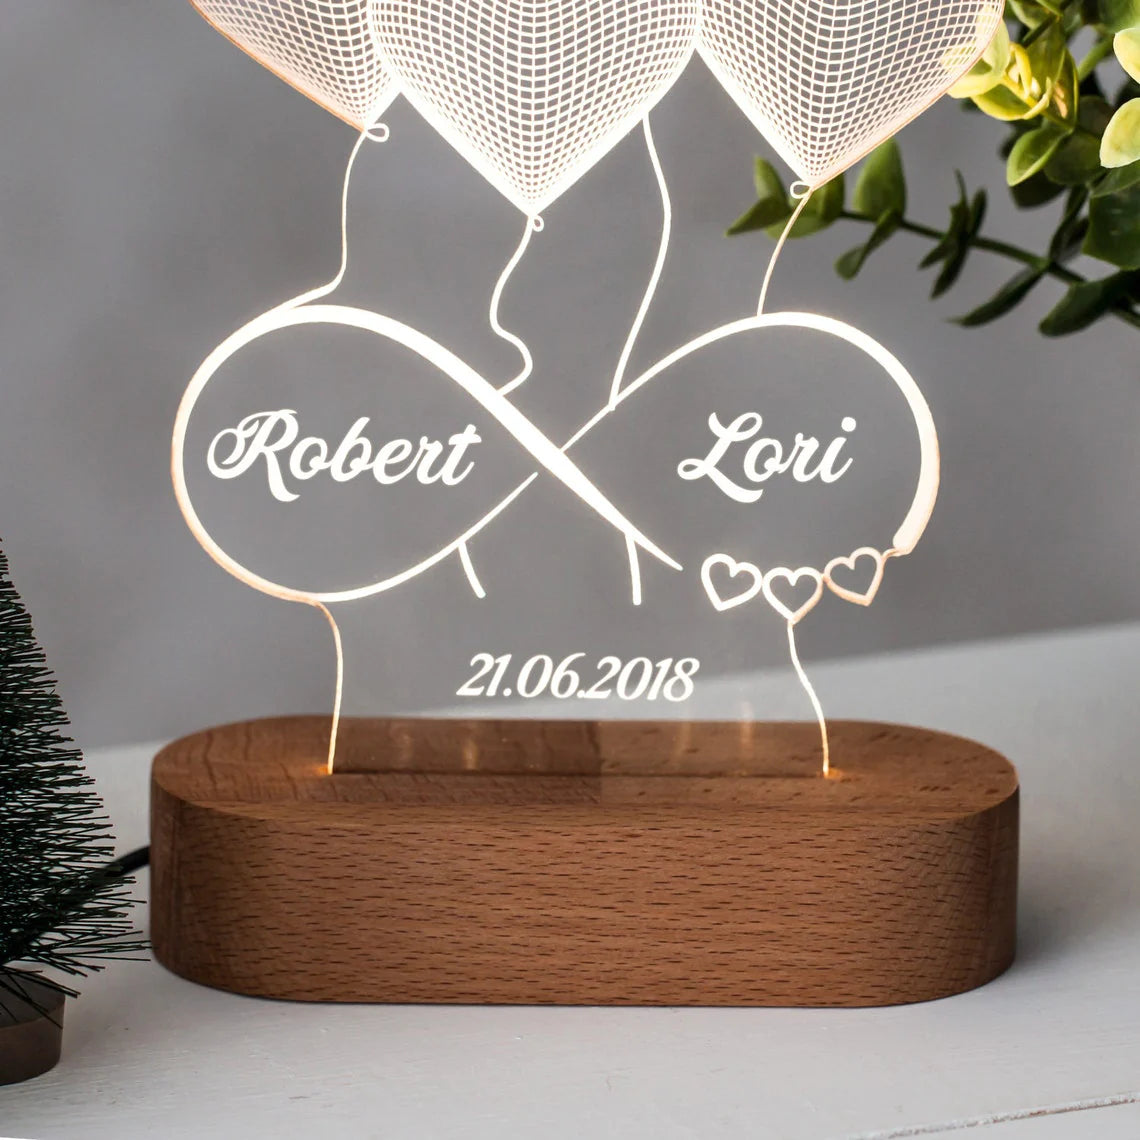 Personalized 3D Printed Heart Lamp